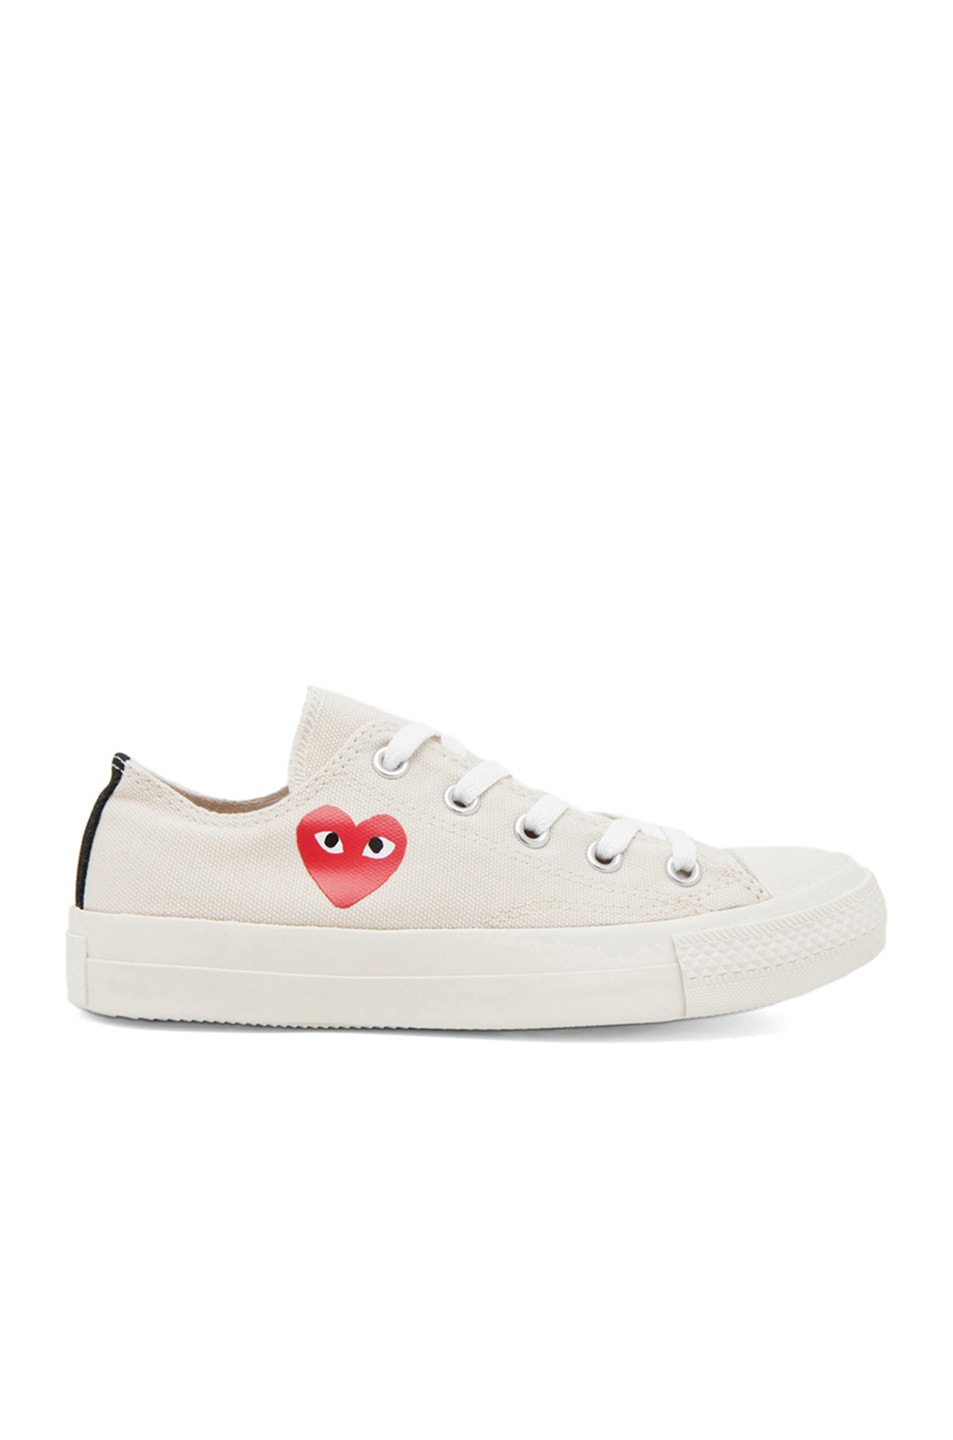 cdg converse low small heart, OFF 79 